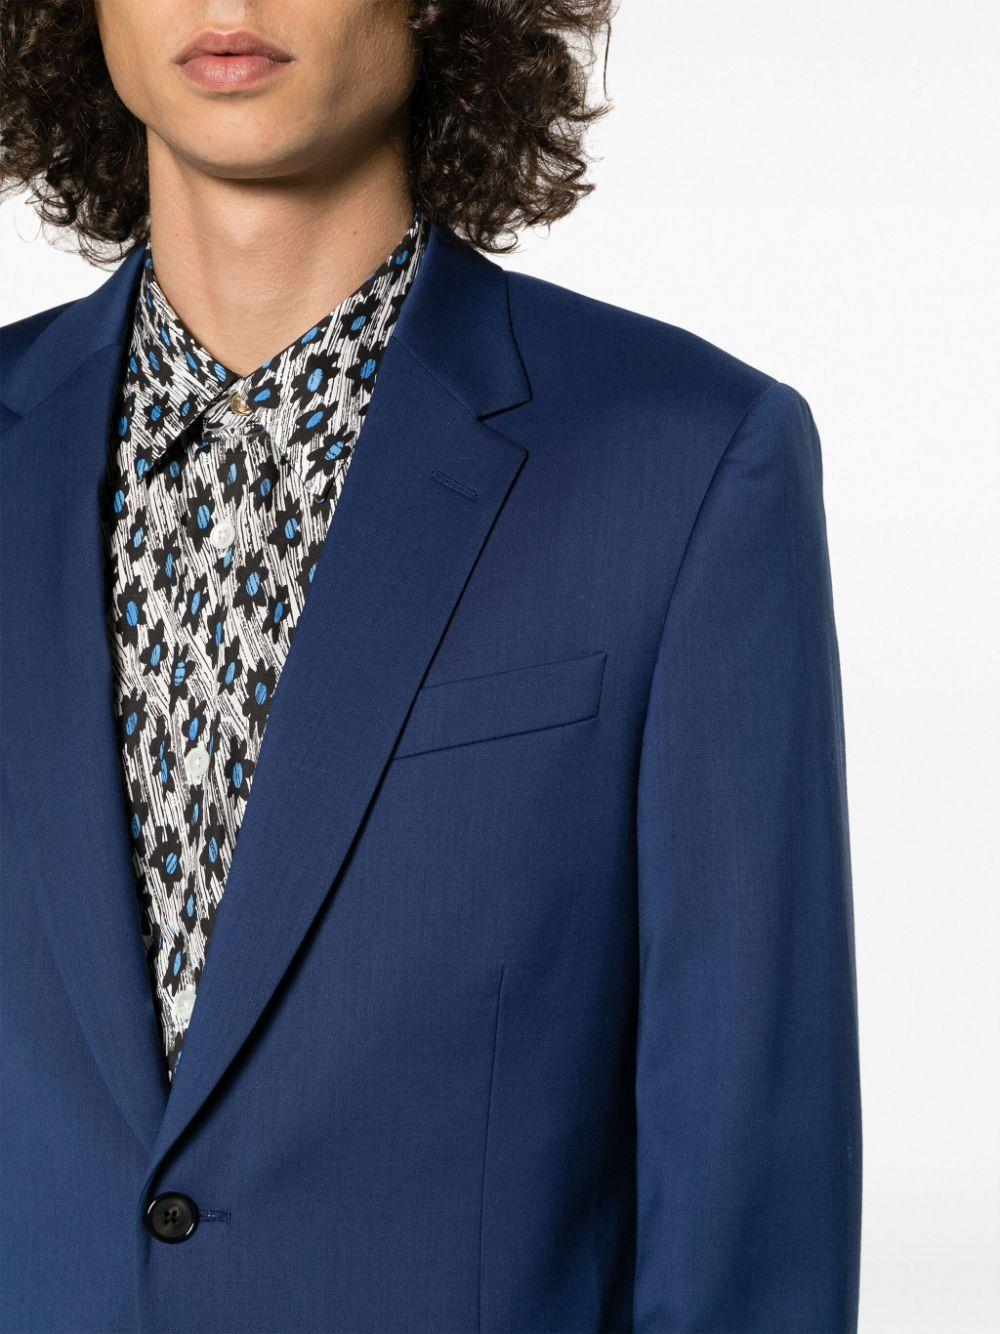 Paul Smith Single-breasted Wool Suit in Blue for Men | Lyst